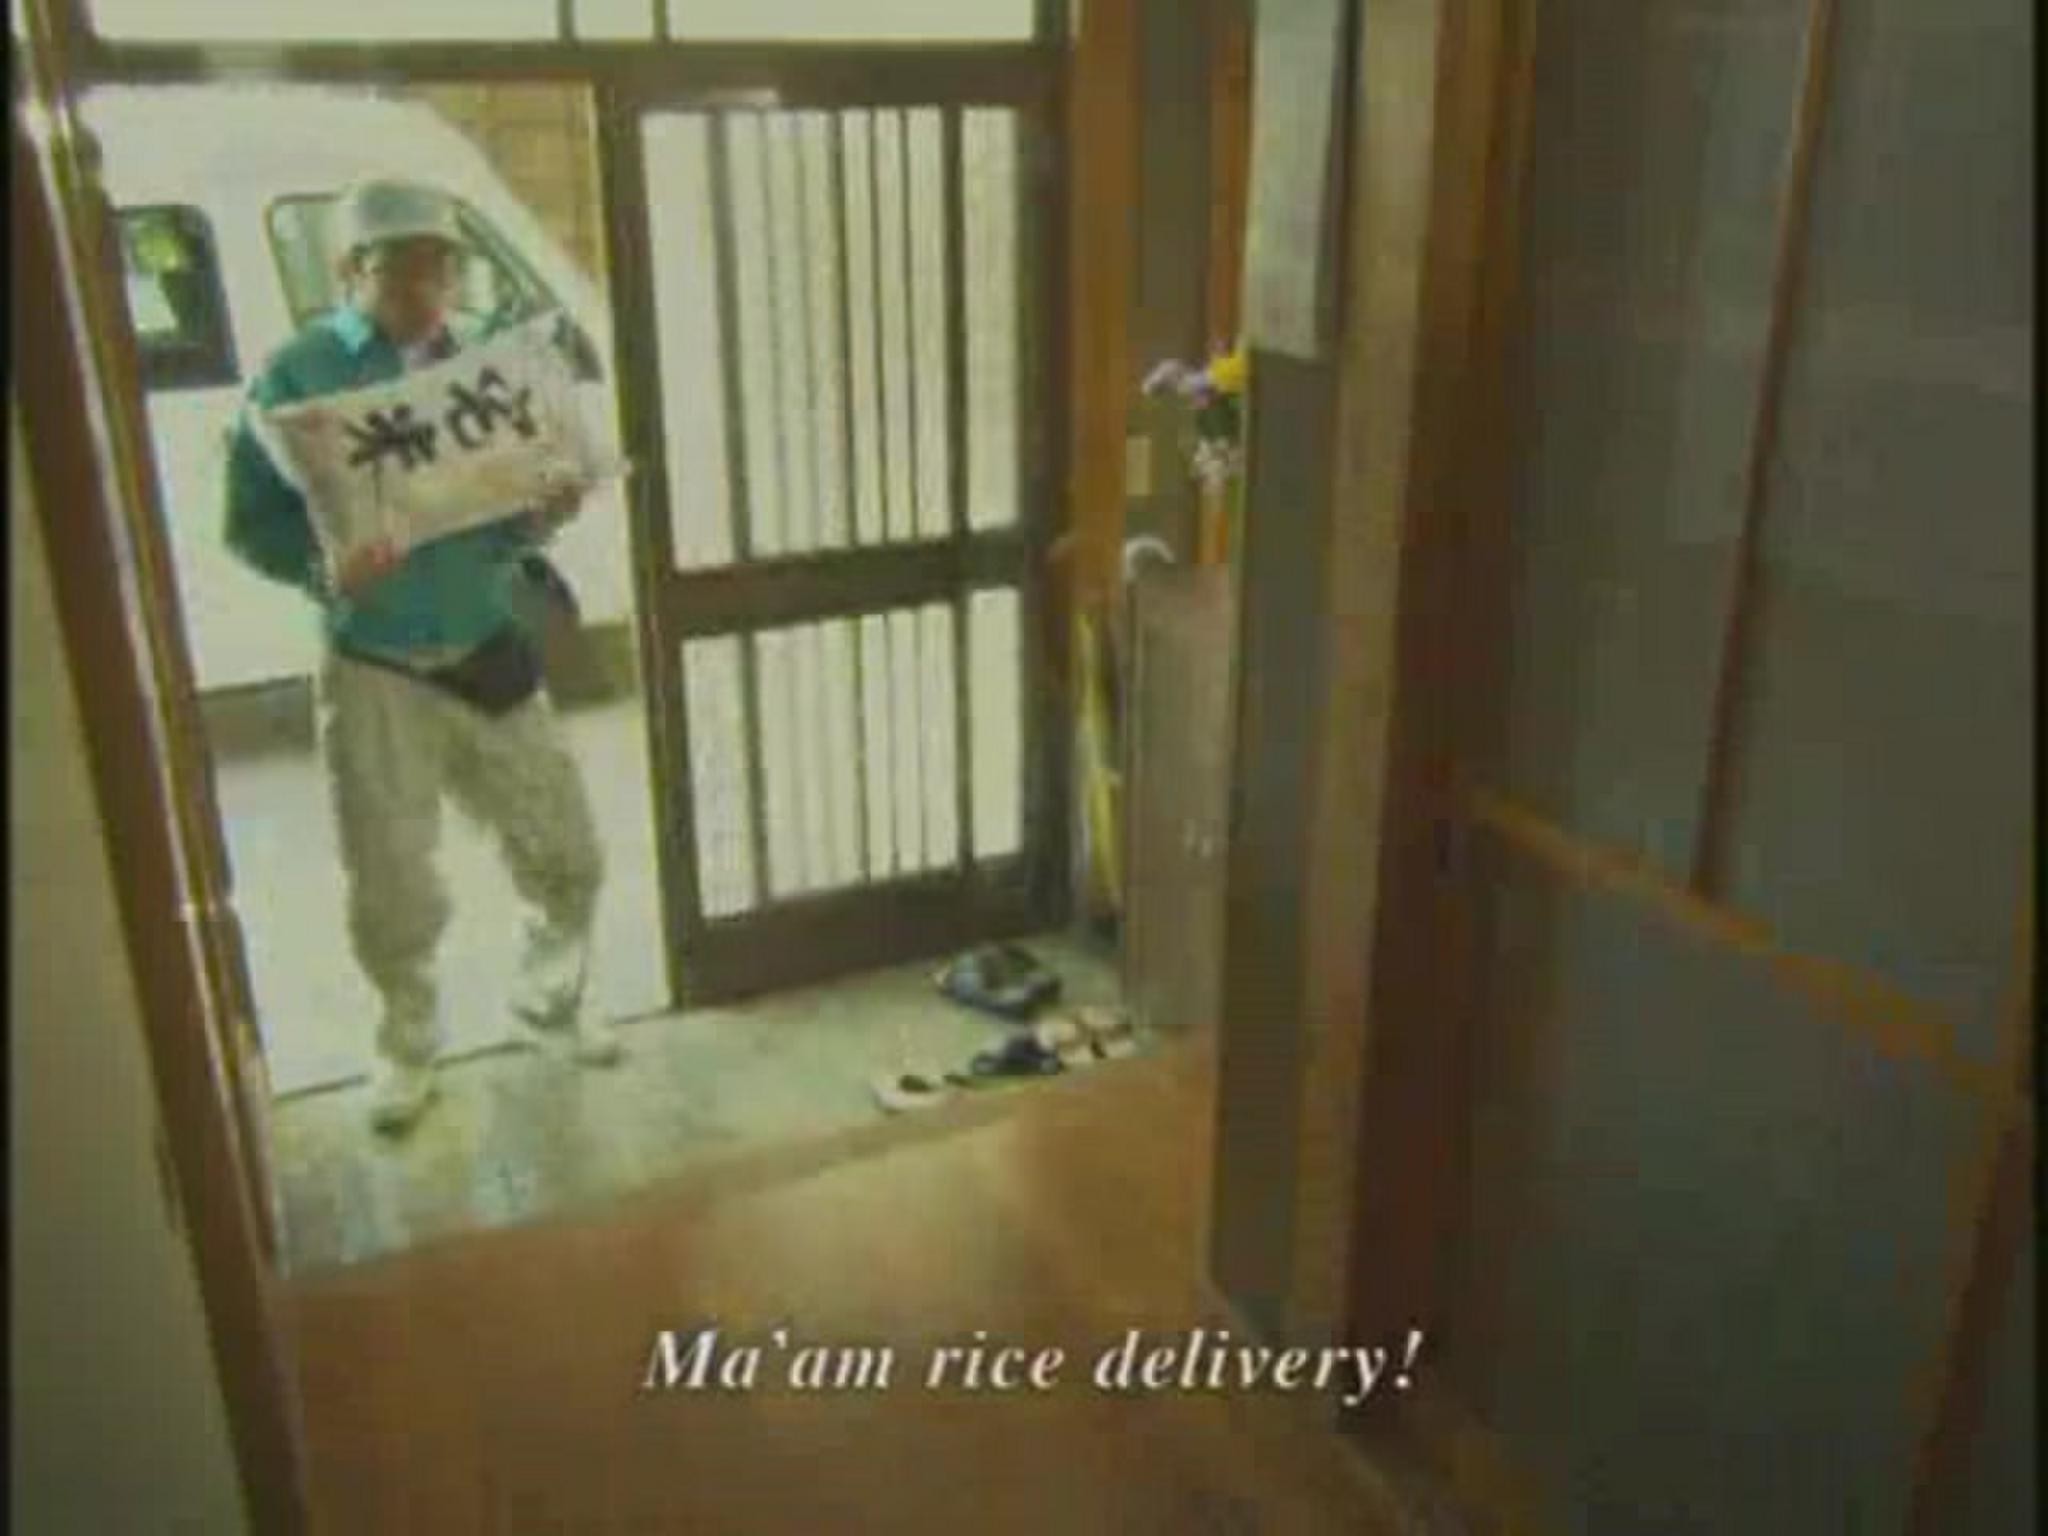 RICE DELIVERY